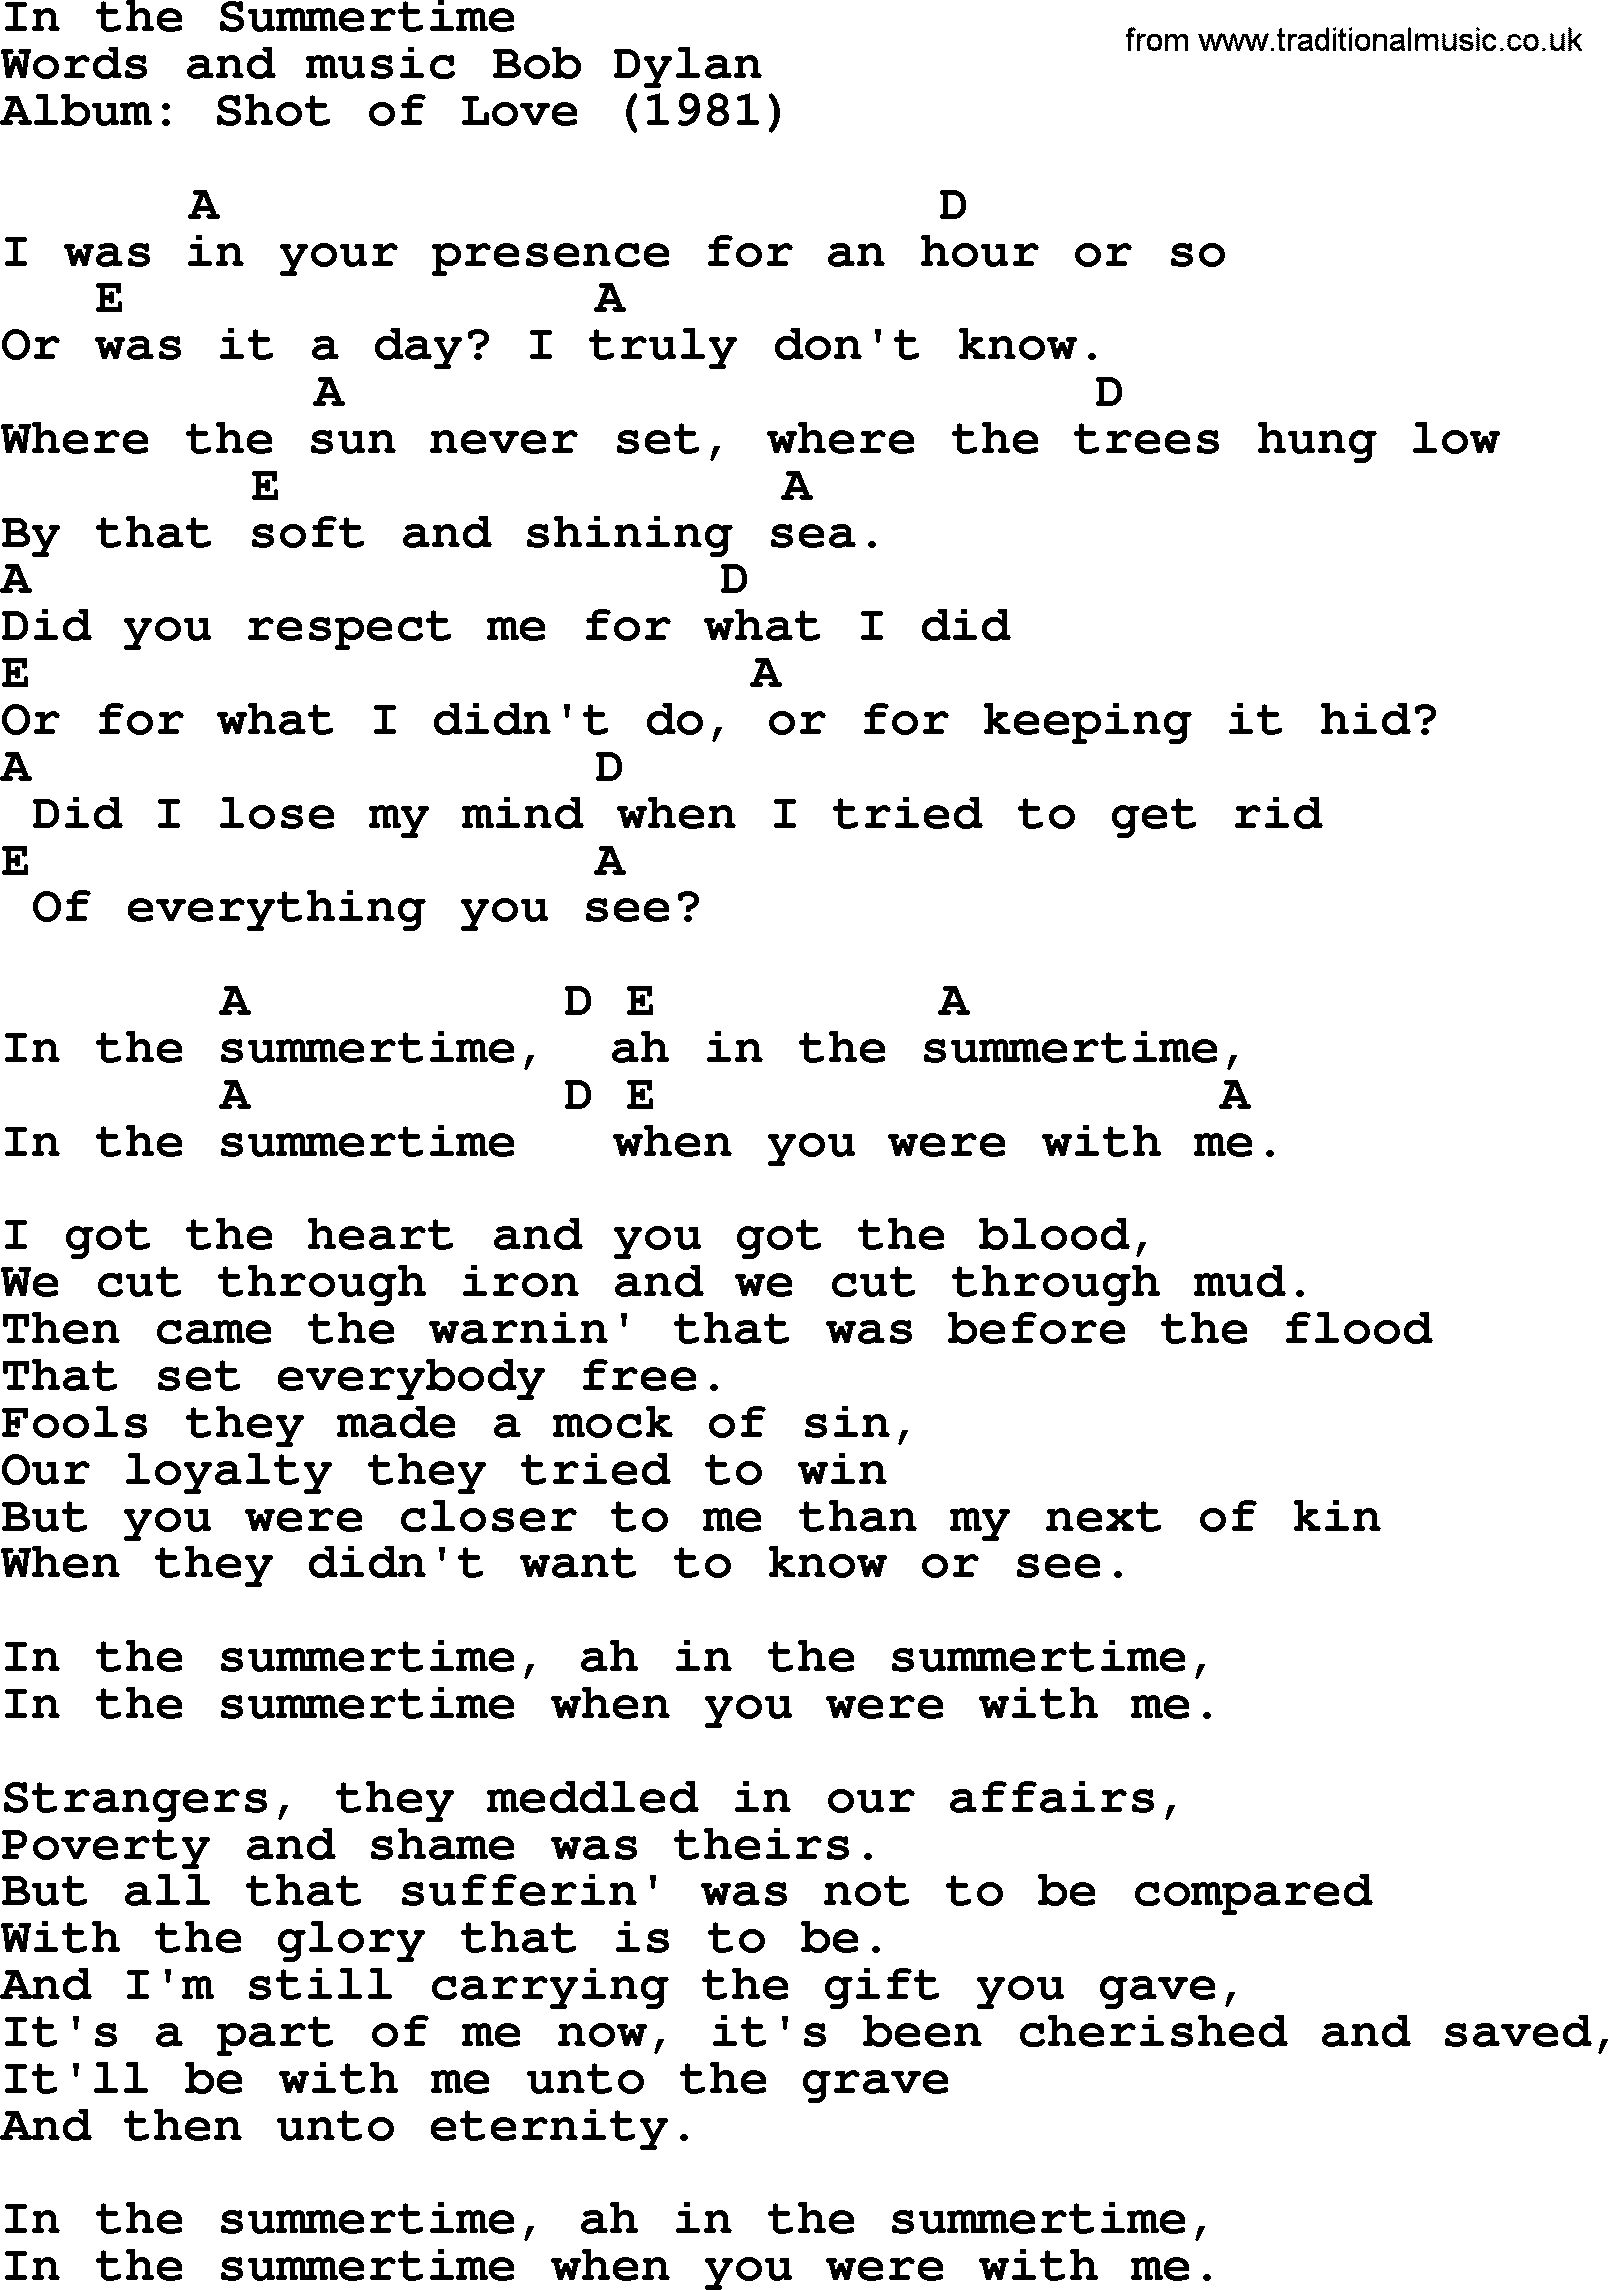 Bob Dylan song, lyrics with chords - In the Summertime